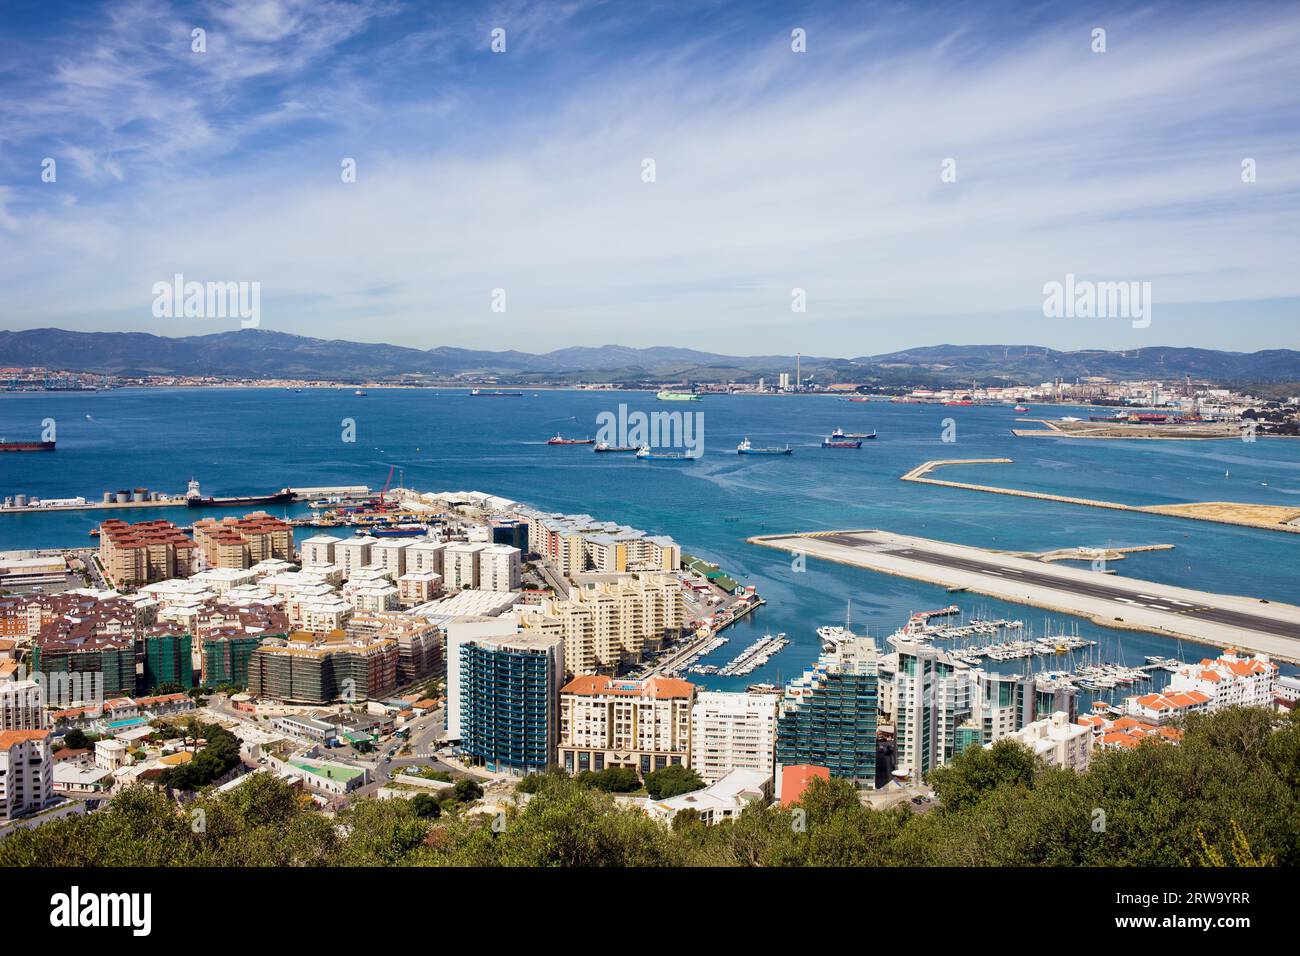 Gibraltar city and bay from above, Spain on the horizon Stock Photo